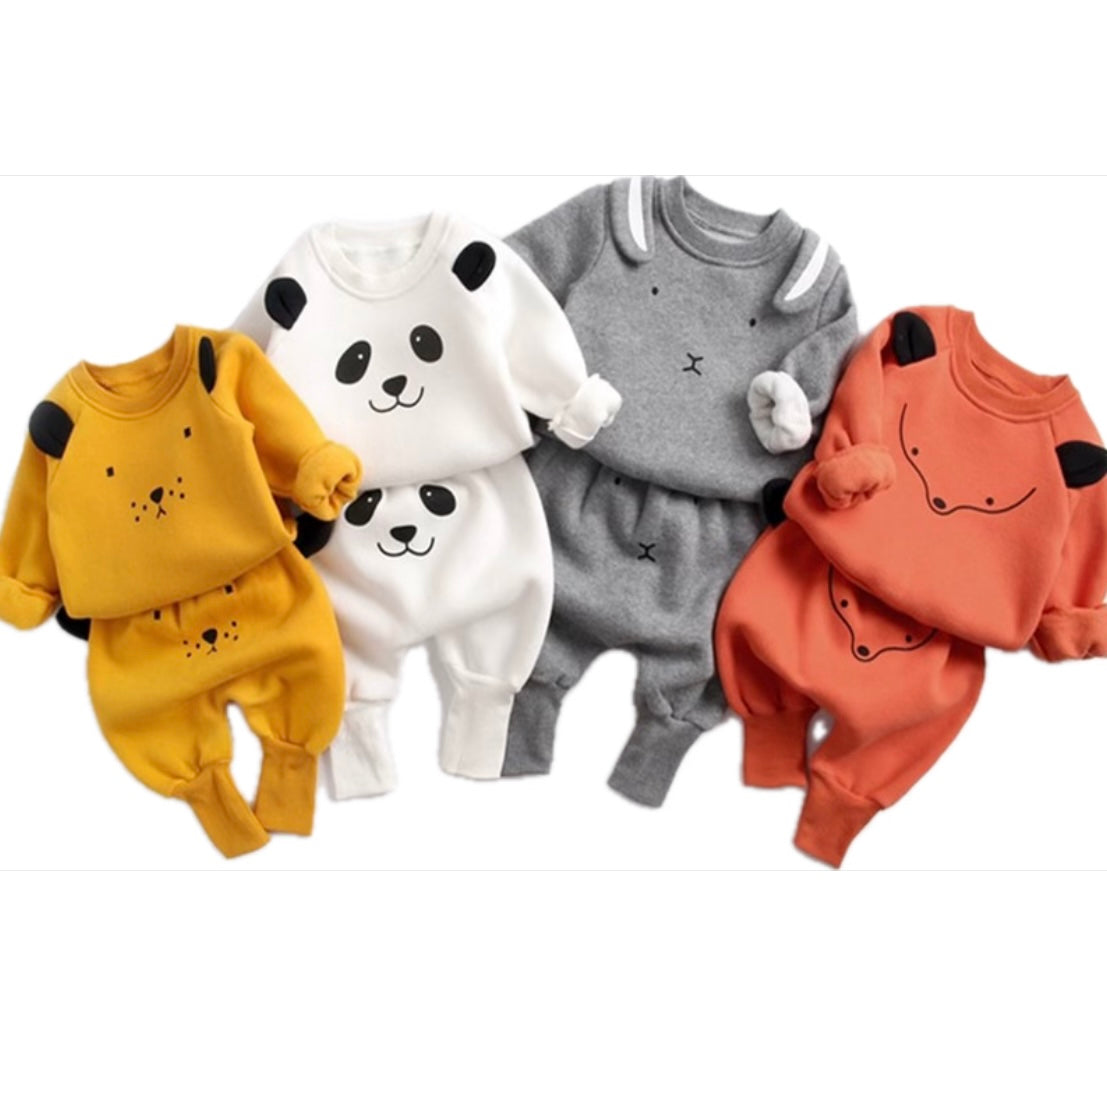 Baby Sweatsuit Set | Cozy Comfort with Whimsical Details